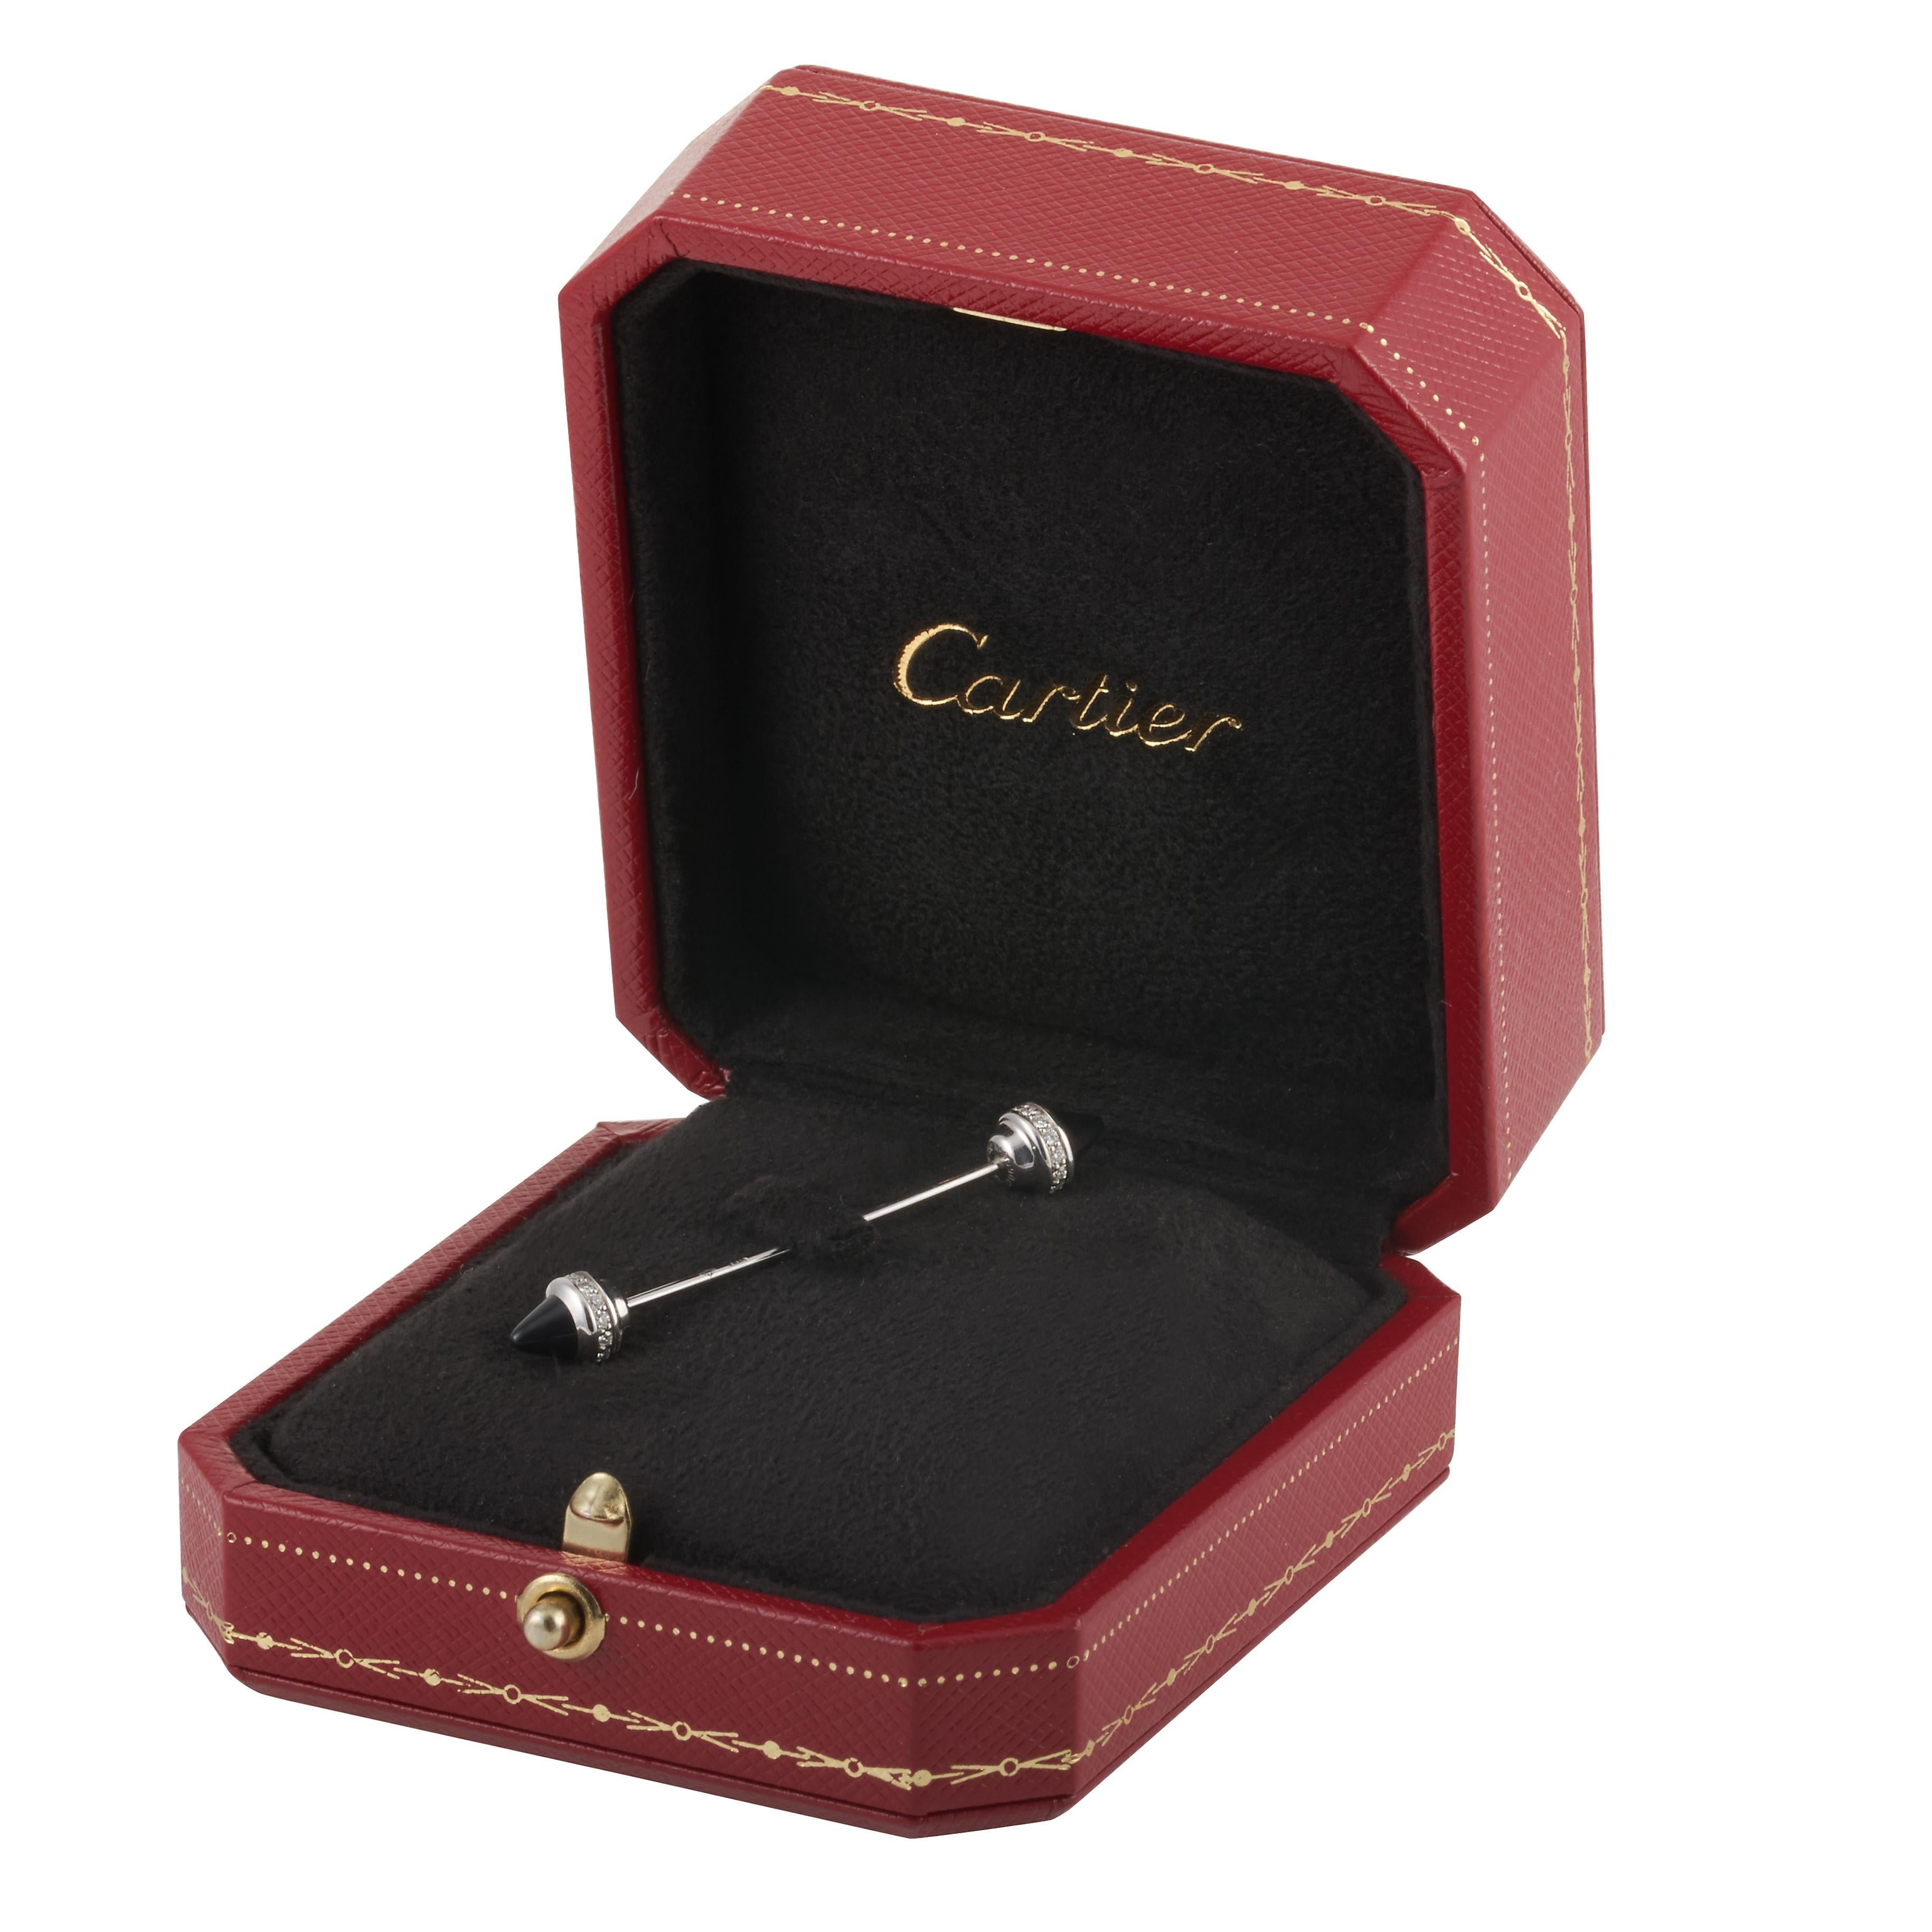 Cartier Menotte diamond and onyx jabot pin in 18kwg accompanied by Cartier box. 

This pin contains 28 round brilliant cut diamonds weighing approximately 0.30 carat with F-G color and VS clarity, accented by two pieces of onyx.

1.96